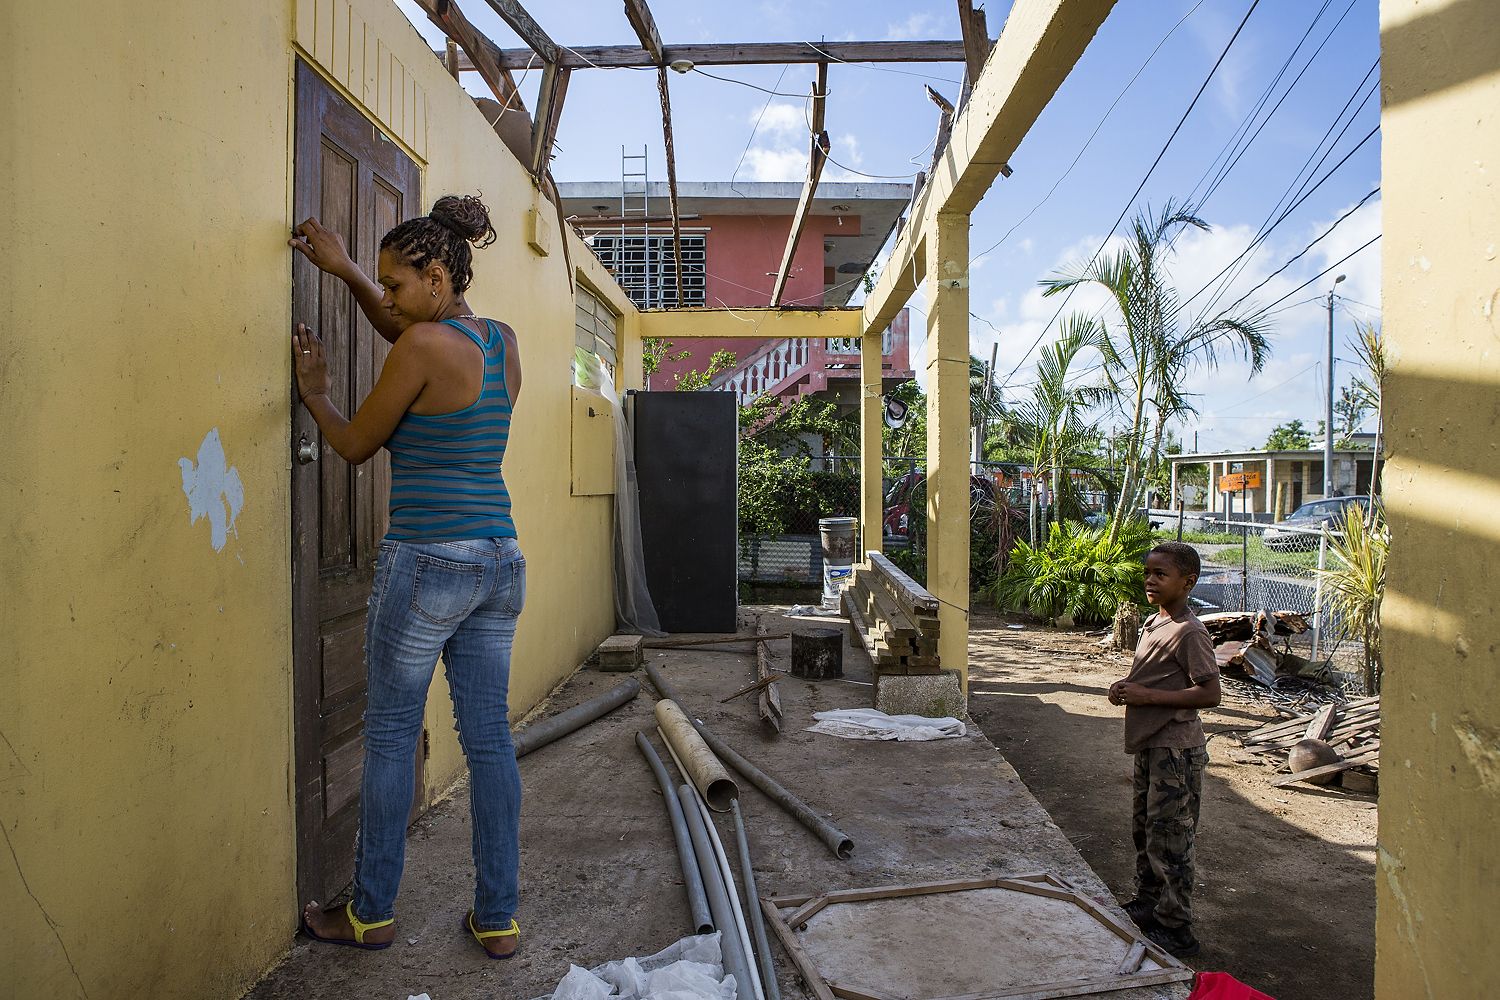 Rosalda Olma, a wife and mother to three kids, opens the front door to what remains of her home in Loiza. The entire home and contents were destroyed by the hurricane, and the family is living in a nearby school for the time being. “It’s hard getting used to these living conditions,” she said. “All five of us are trying to fit inside a single room.” Image by Ryan Michalesko. Puerto Rico, 2017.